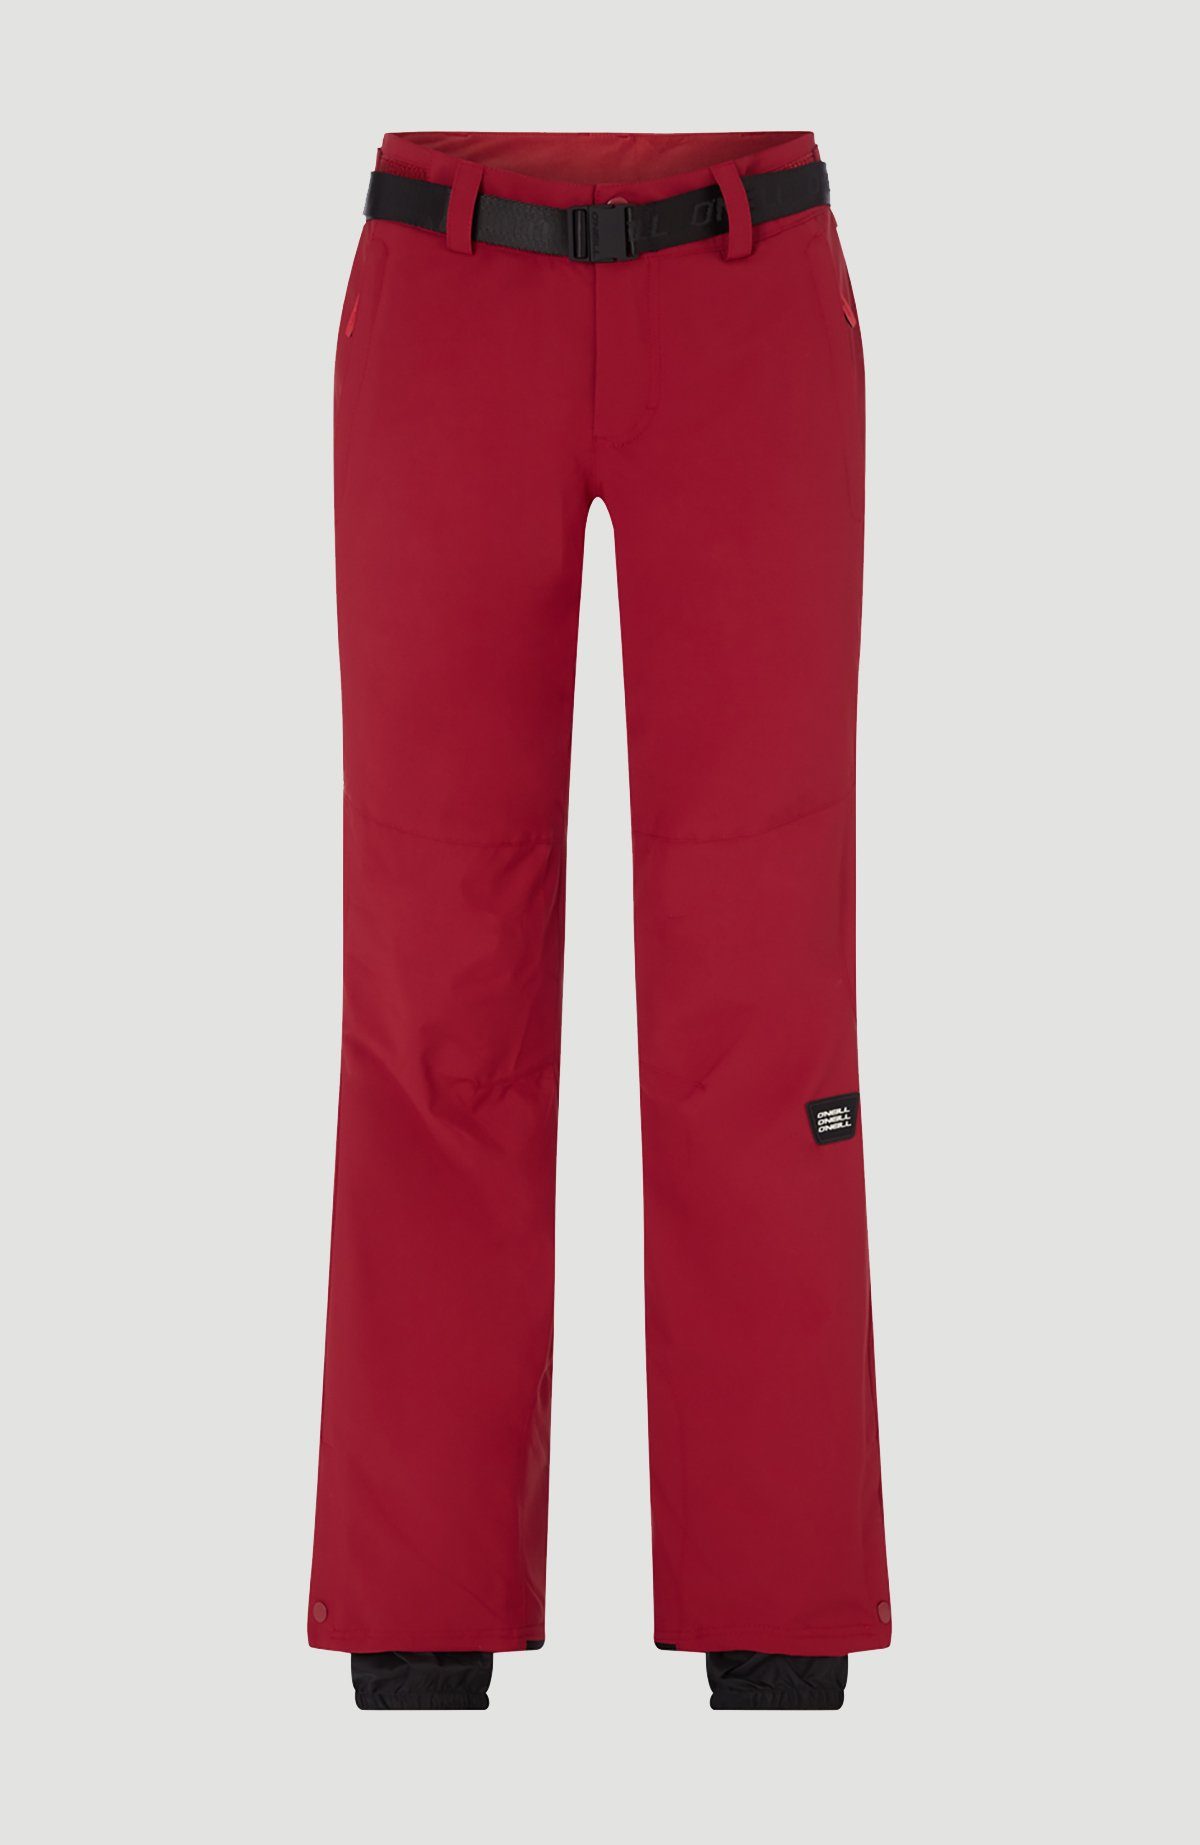 [Japanisches limitiertes Modell] O'Neill Skihose "Star" red